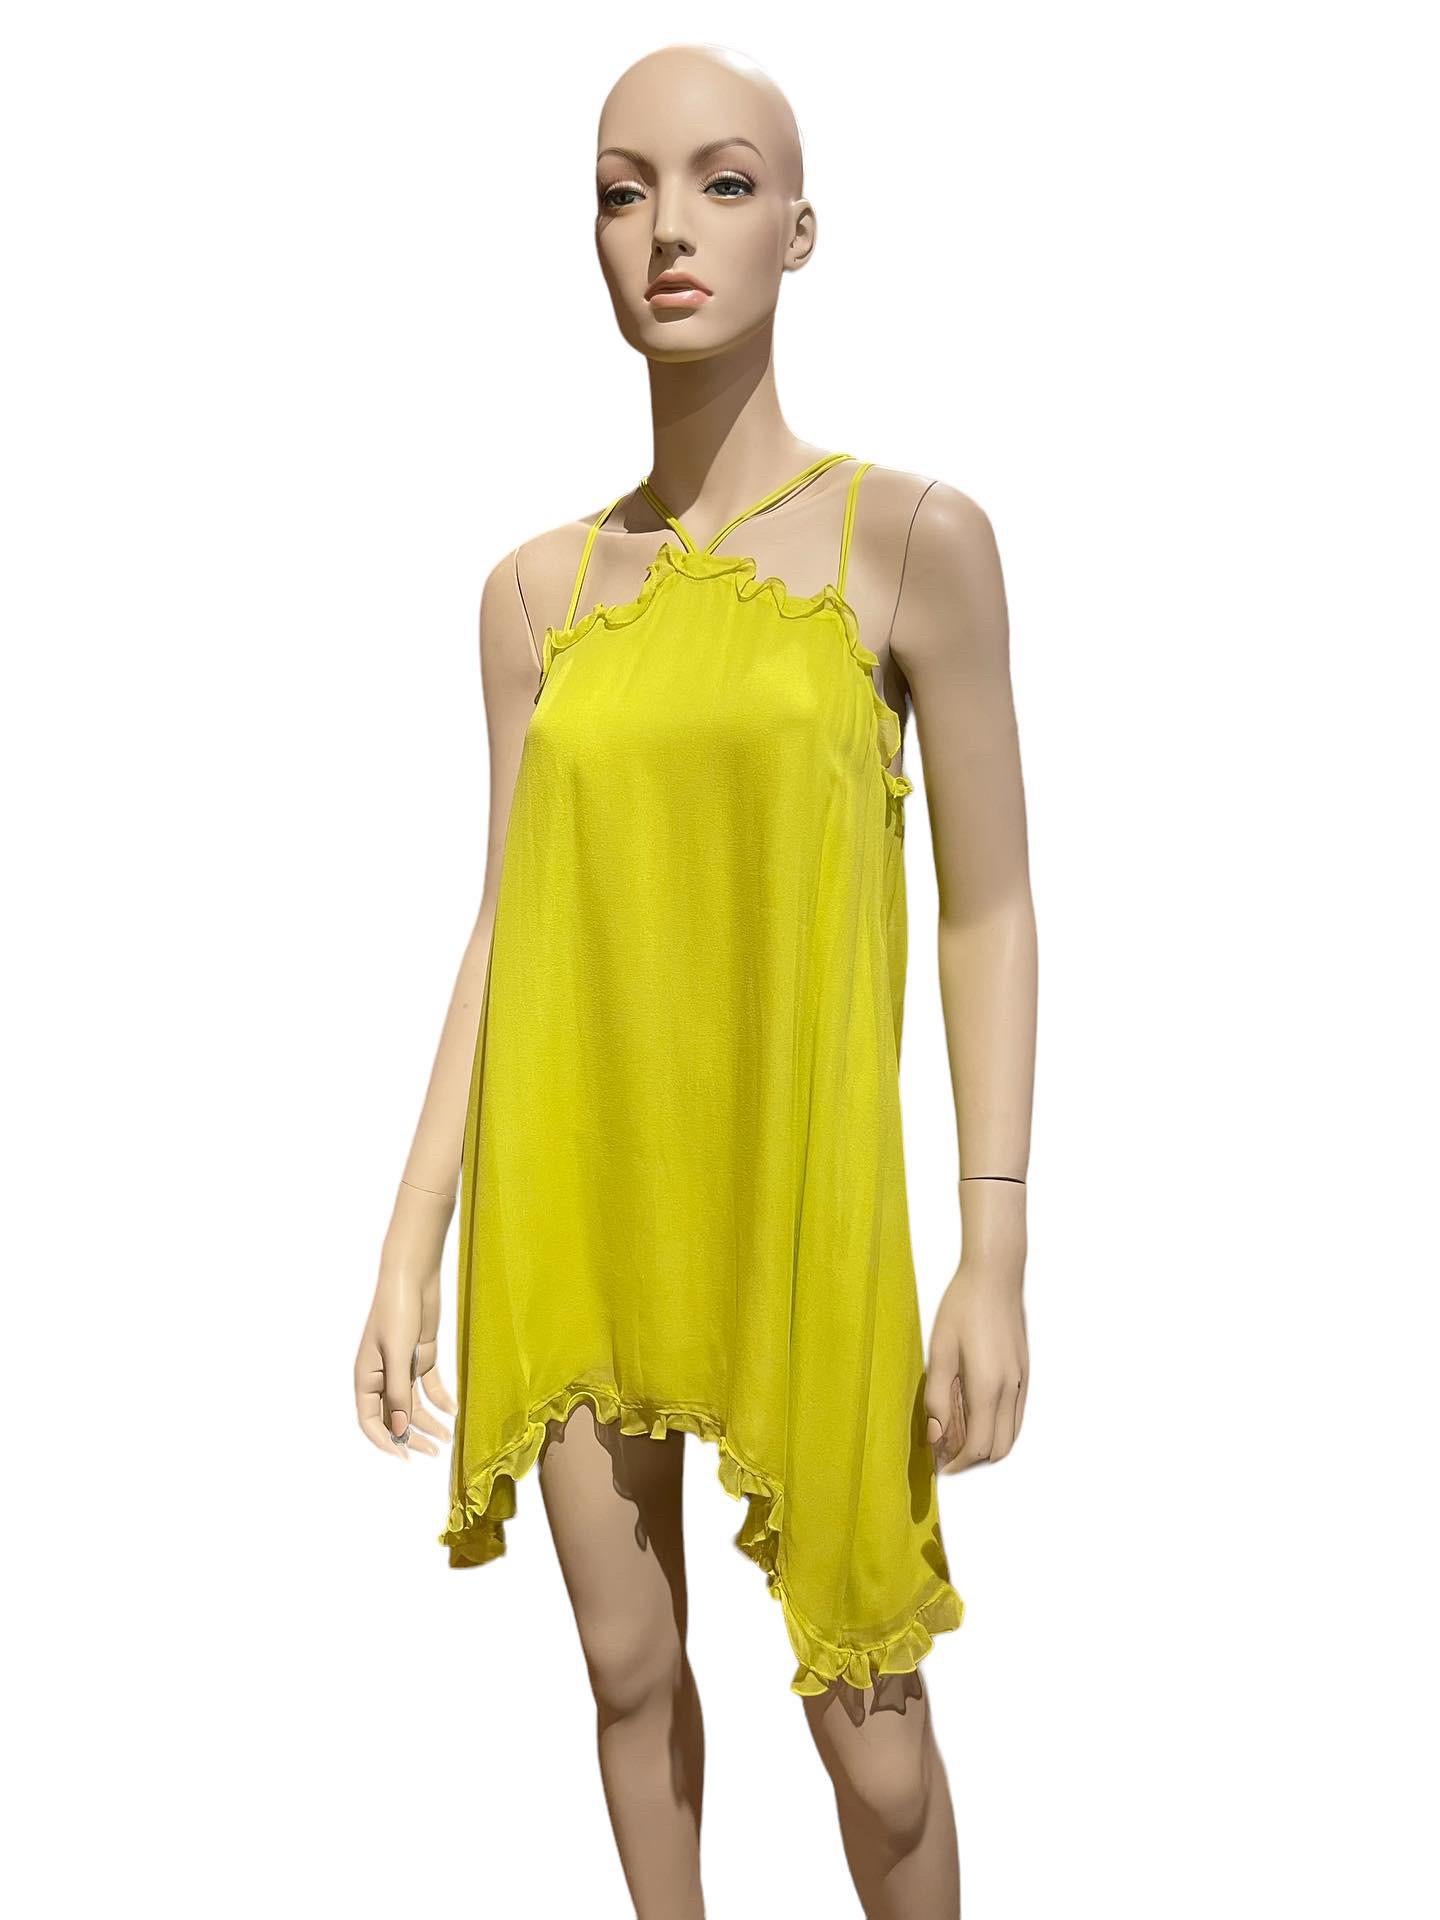 Y2k Stephen Burrows Incredible Neon Green Silk Chiffon Tent Dress with Ruffles with Sexy Straps


34” bust 
33” front length 
36” side length

Stephen Burrows is an American fashion designer based in New York City, known for being one of the first